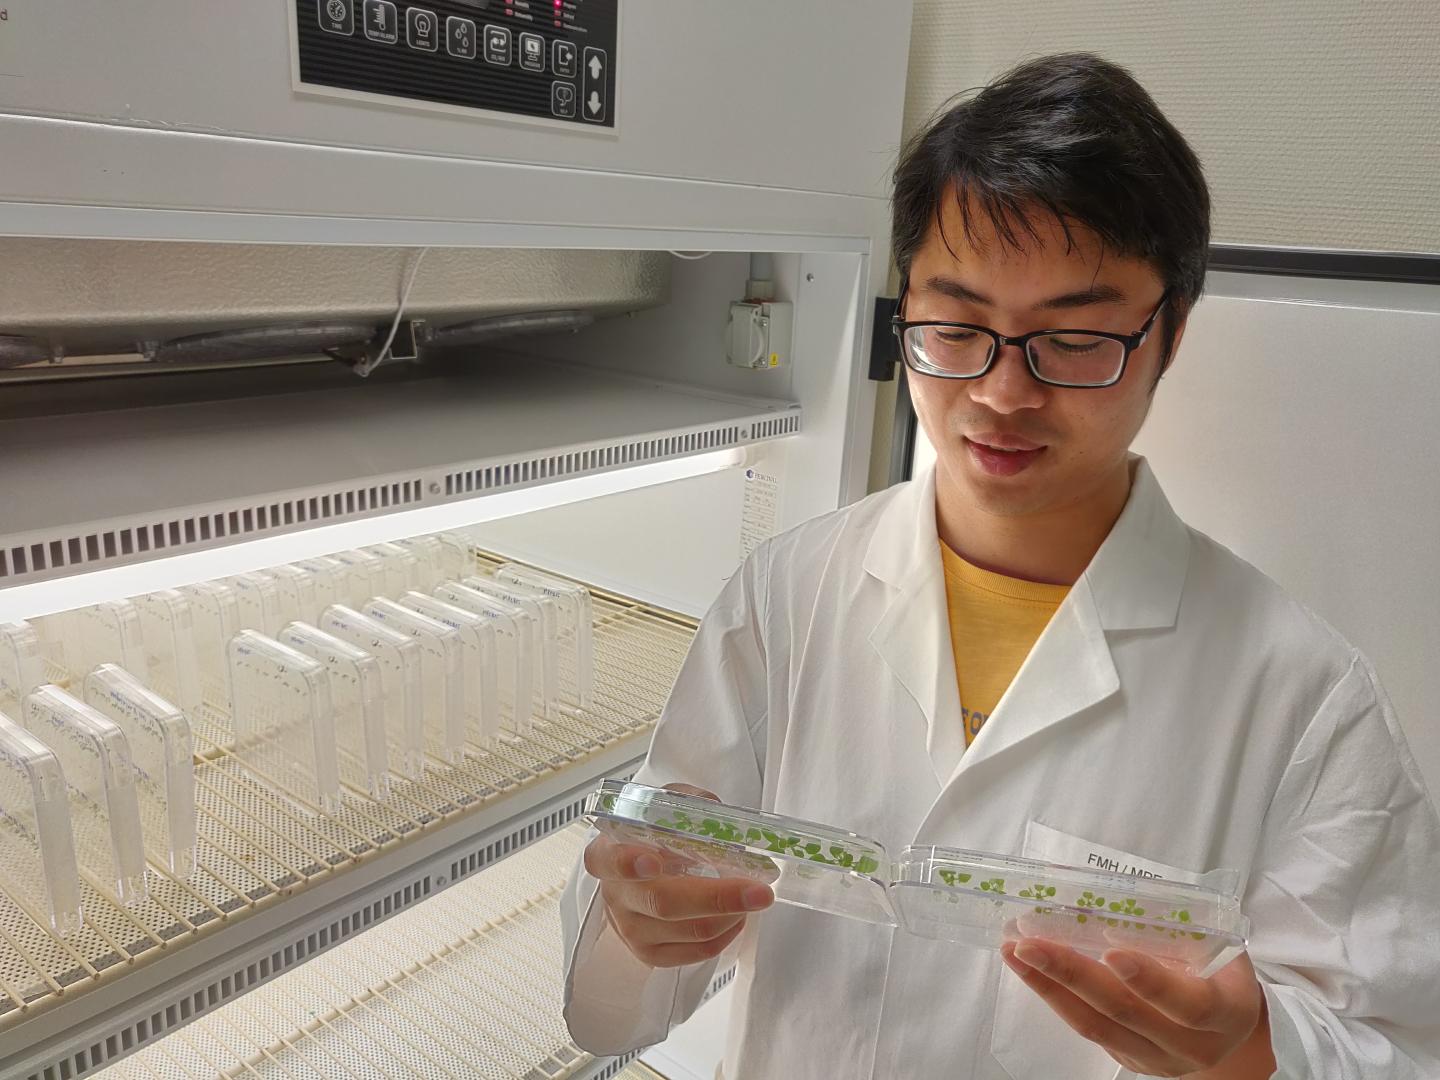 Zhongtao Jia Inspecting the Root Foraging Response of His Arabidopsis Plants